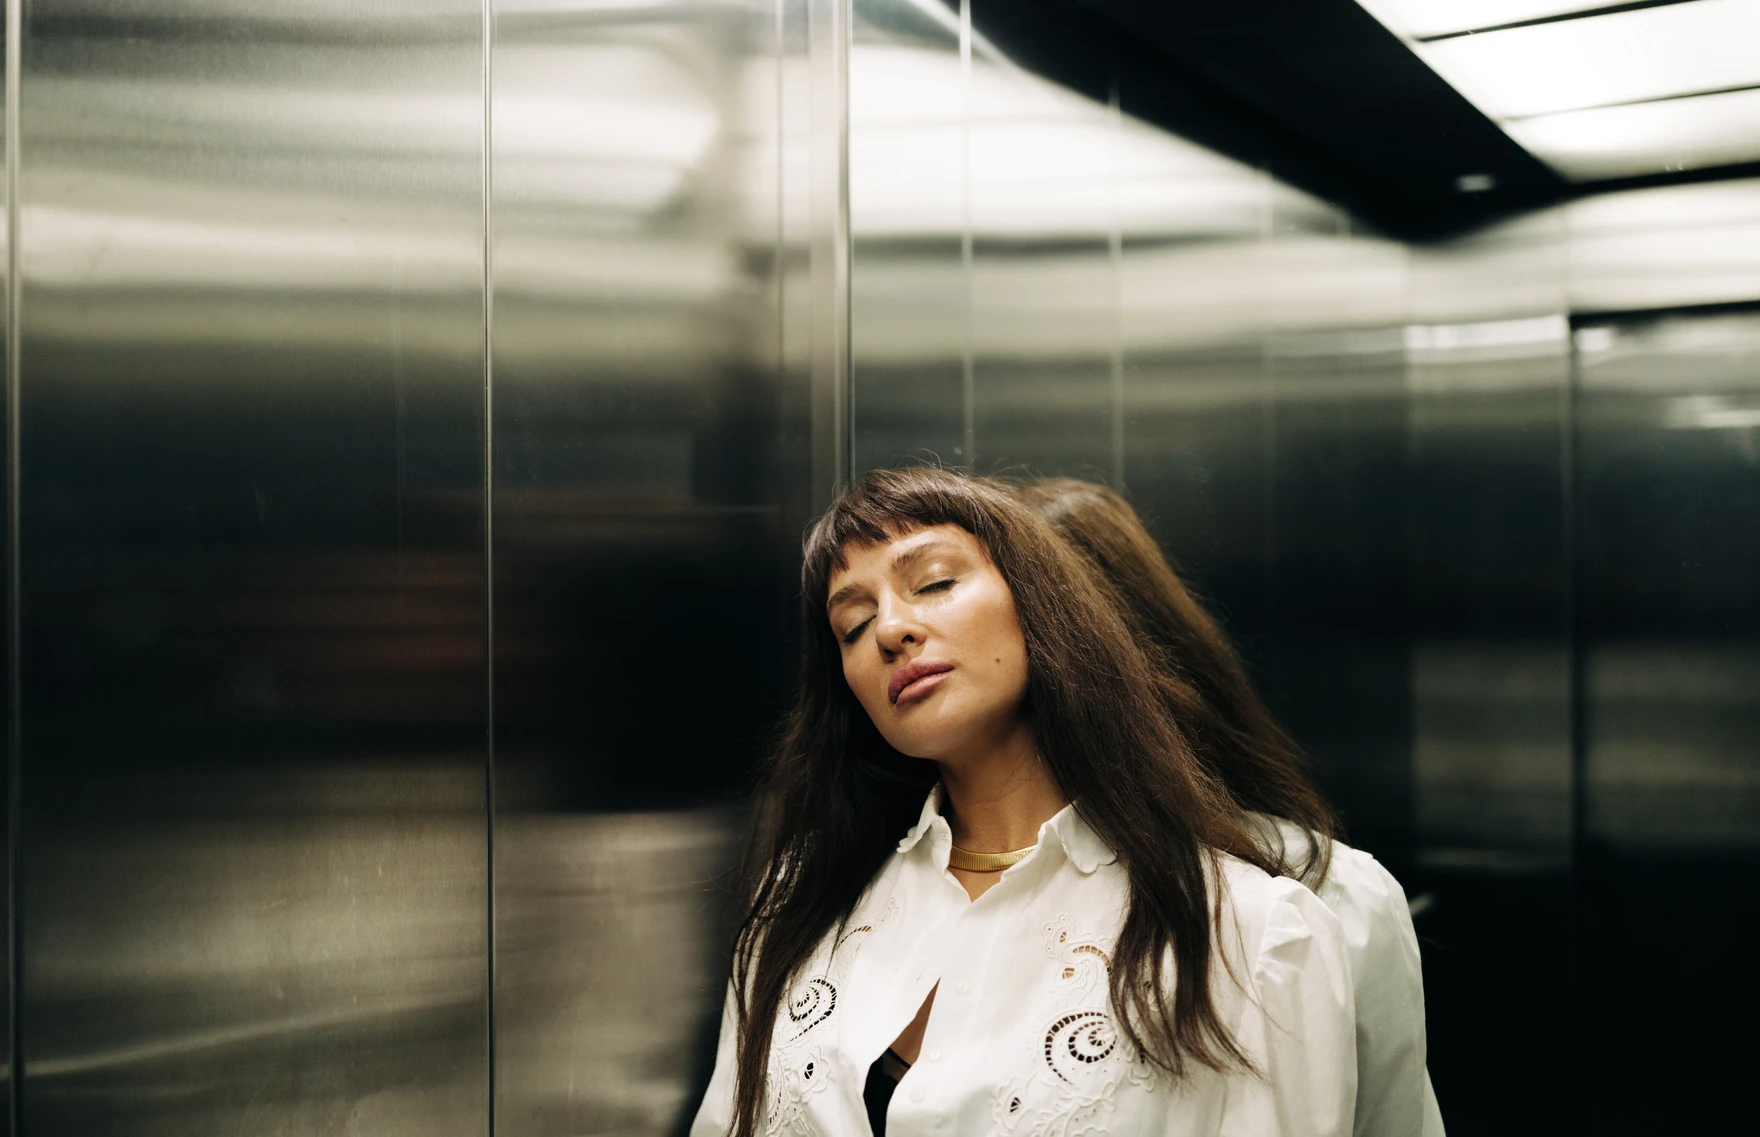 Woman lwith long brunette hair and bangs leaning on wall inside an elevator, eyes closed. AW183